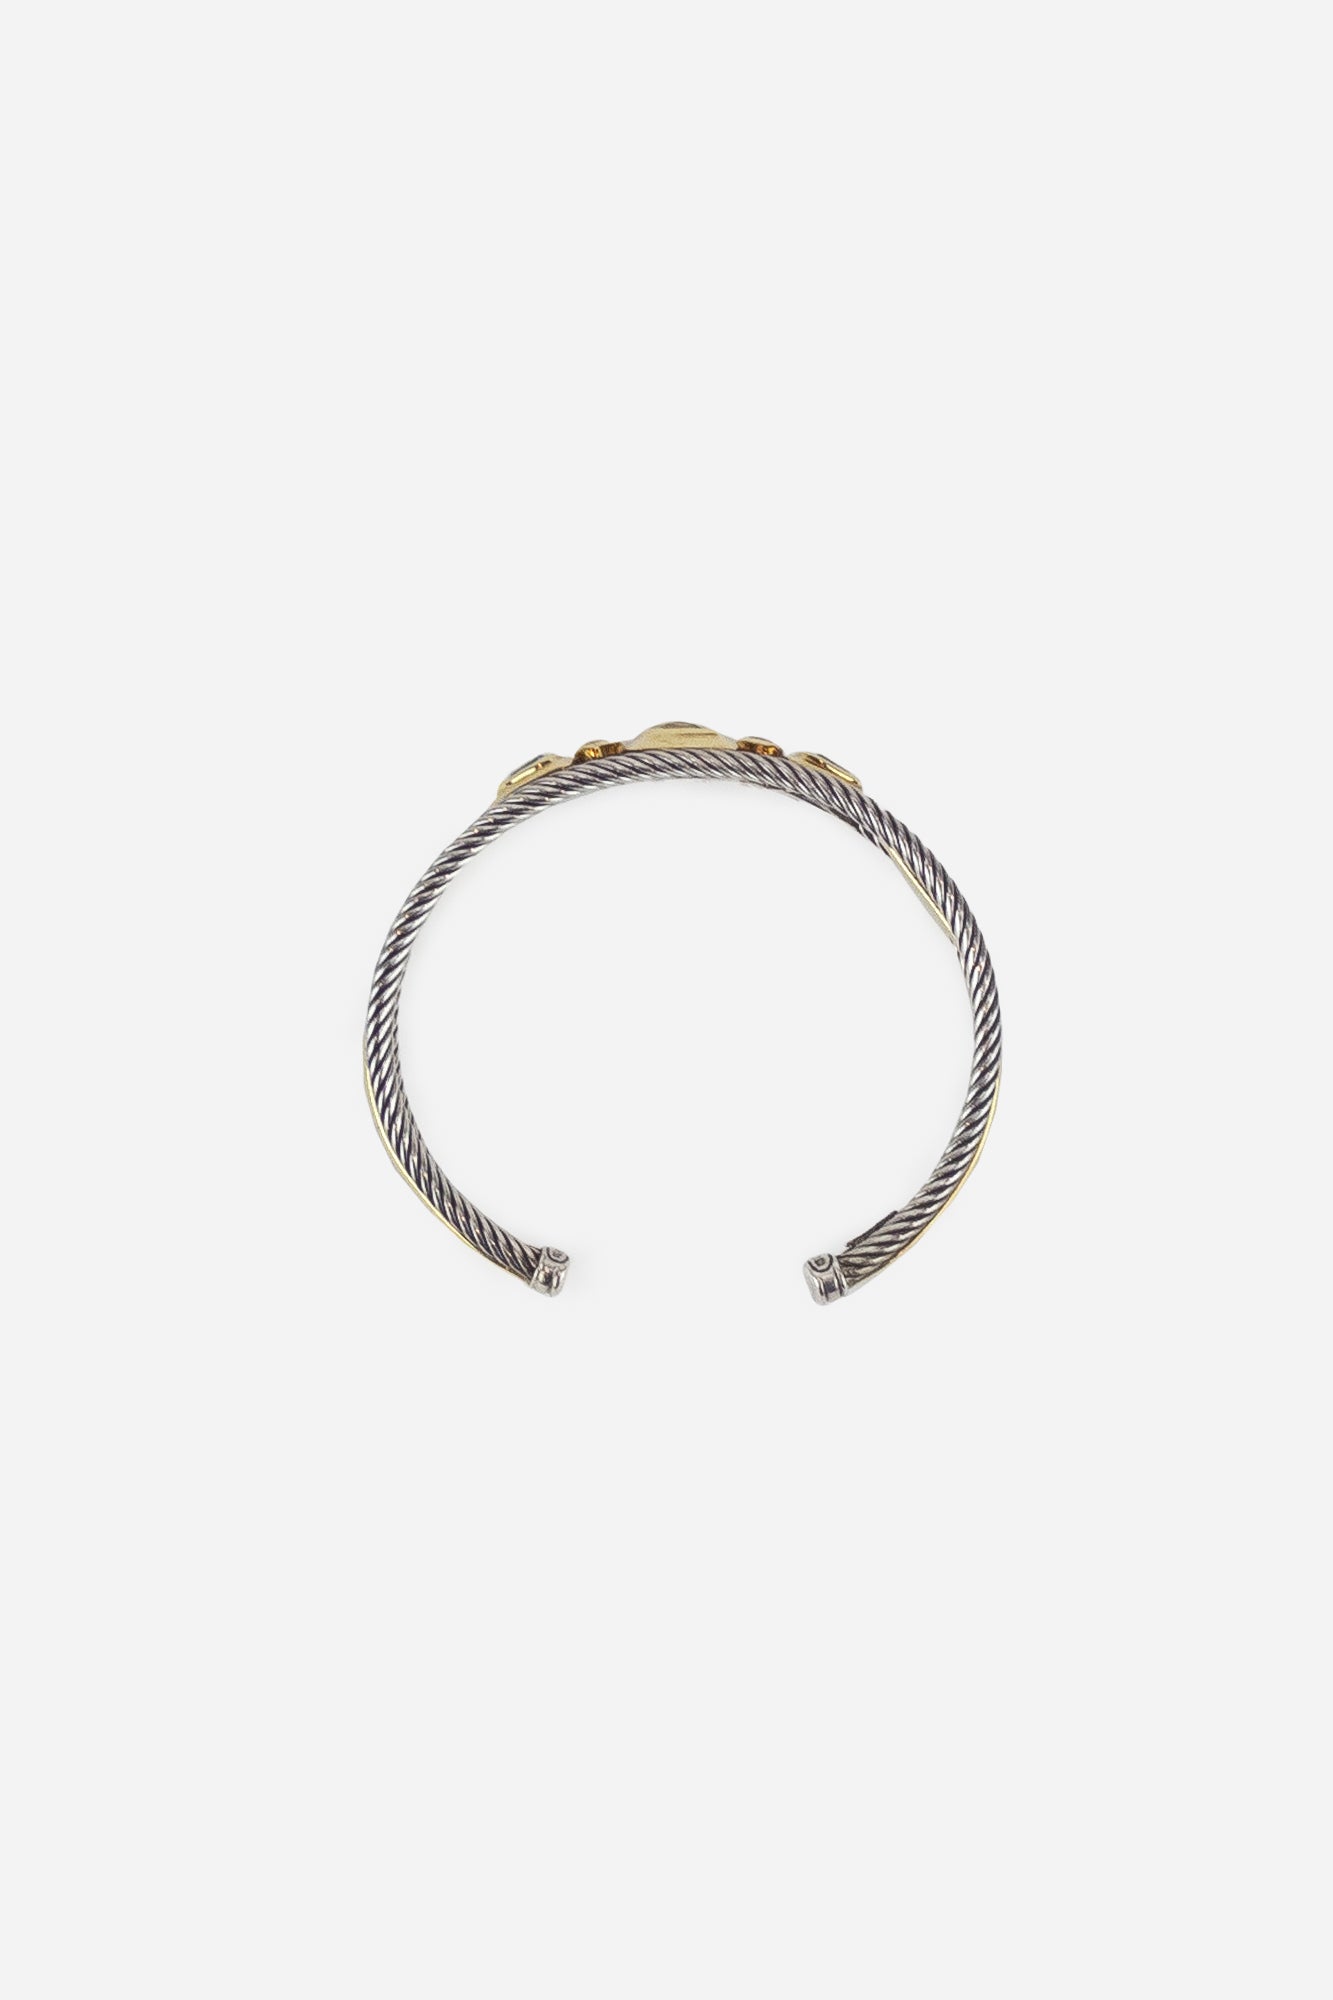 Silver And Gold Cable Cuff Bracelet With Center Gems